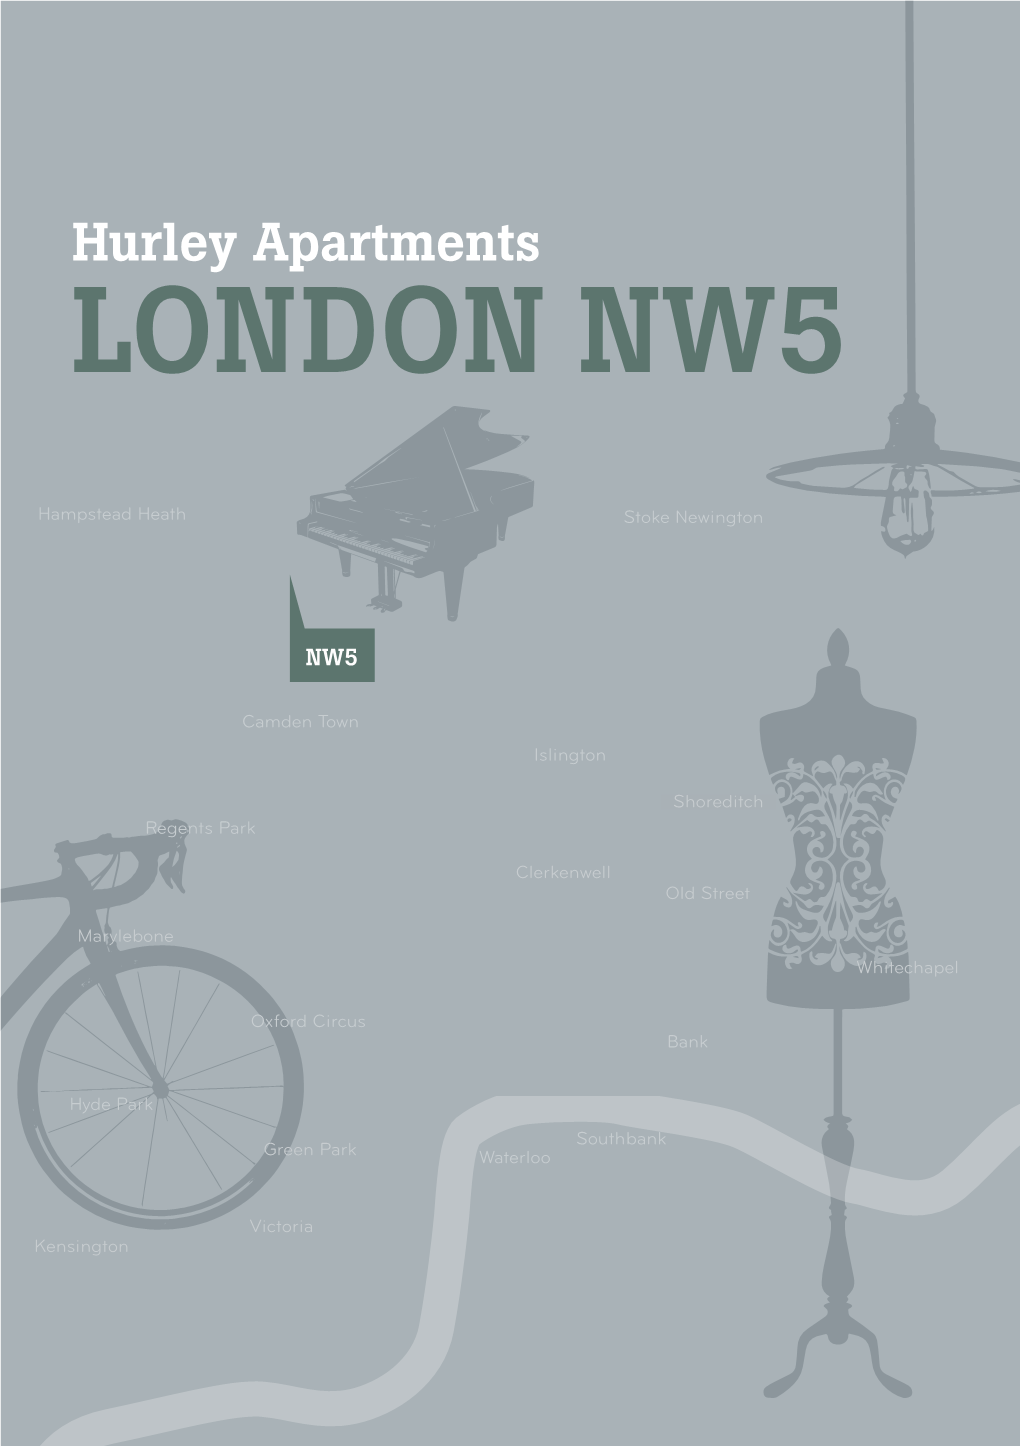 Hurley Apartments LONDON NW5